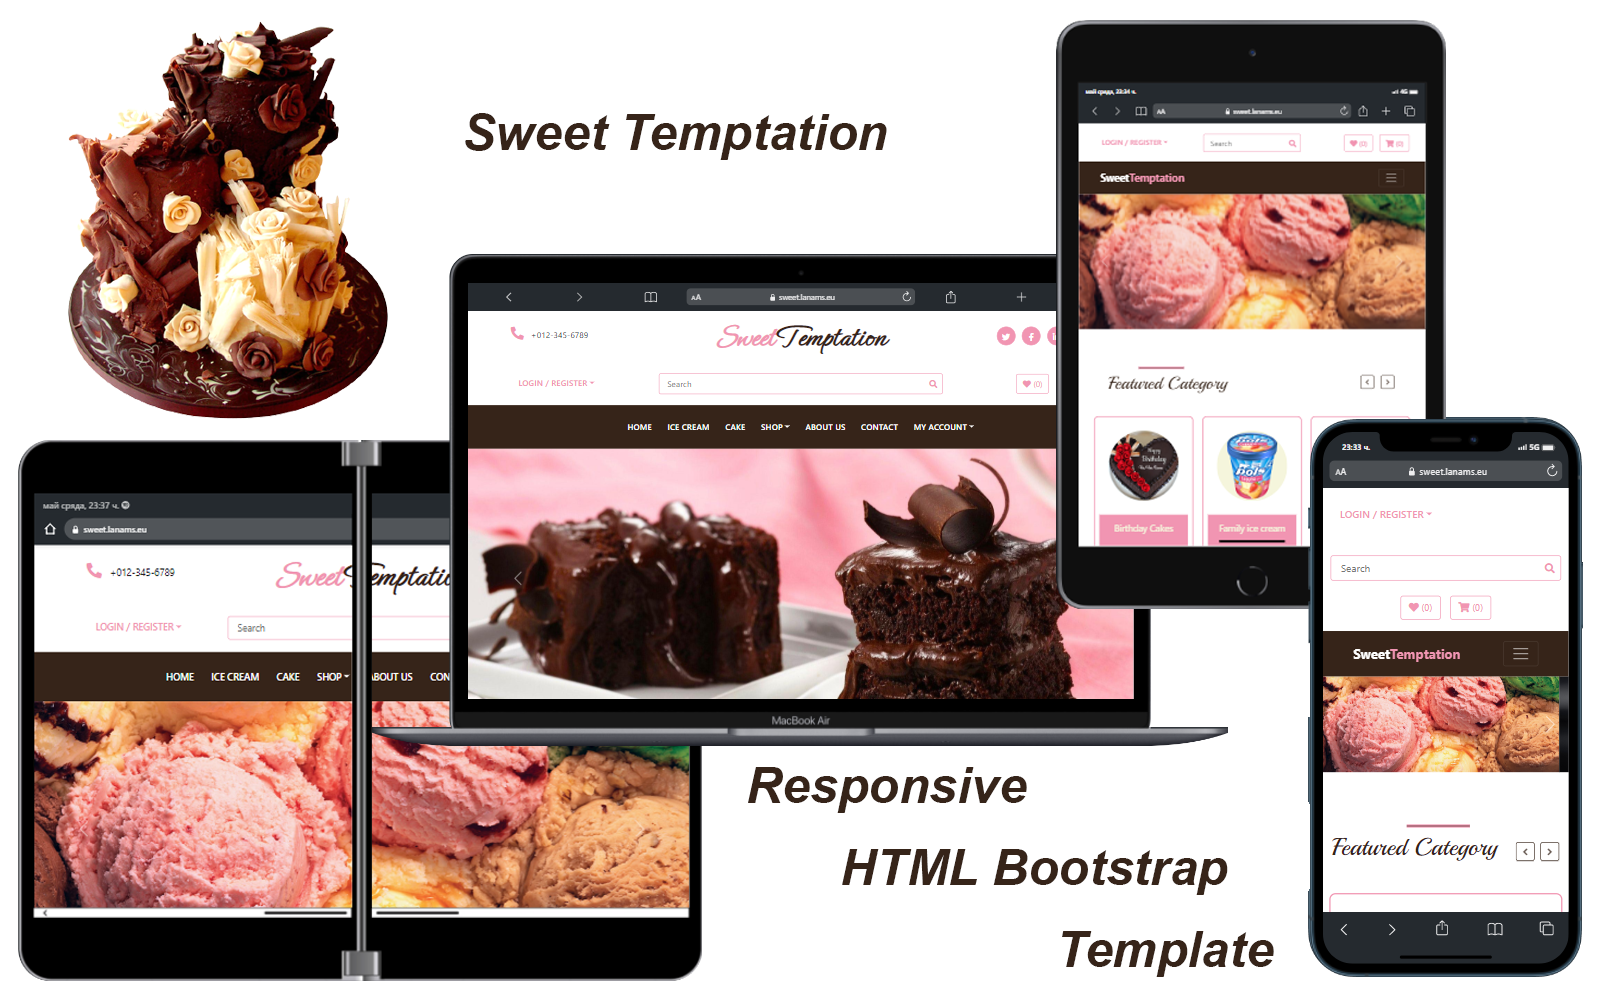 Sweet Temptations - Responsive HTML Bootstrap Template